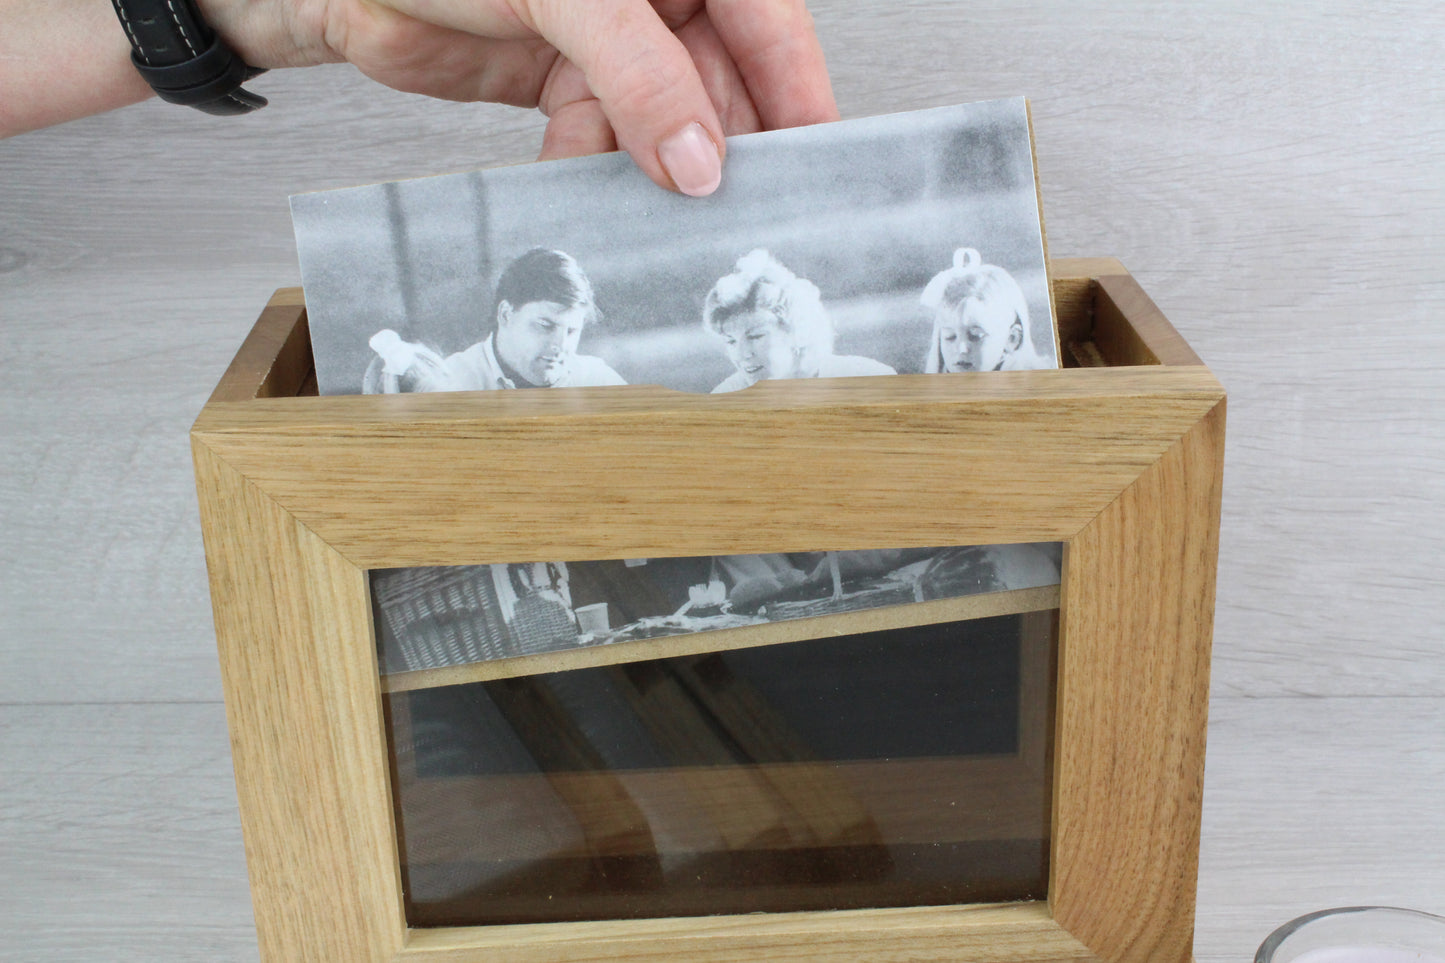 Close-up demonstration of how to insert the photo inside the Personalised Oak Wooden Photo Frame and Album Holder.